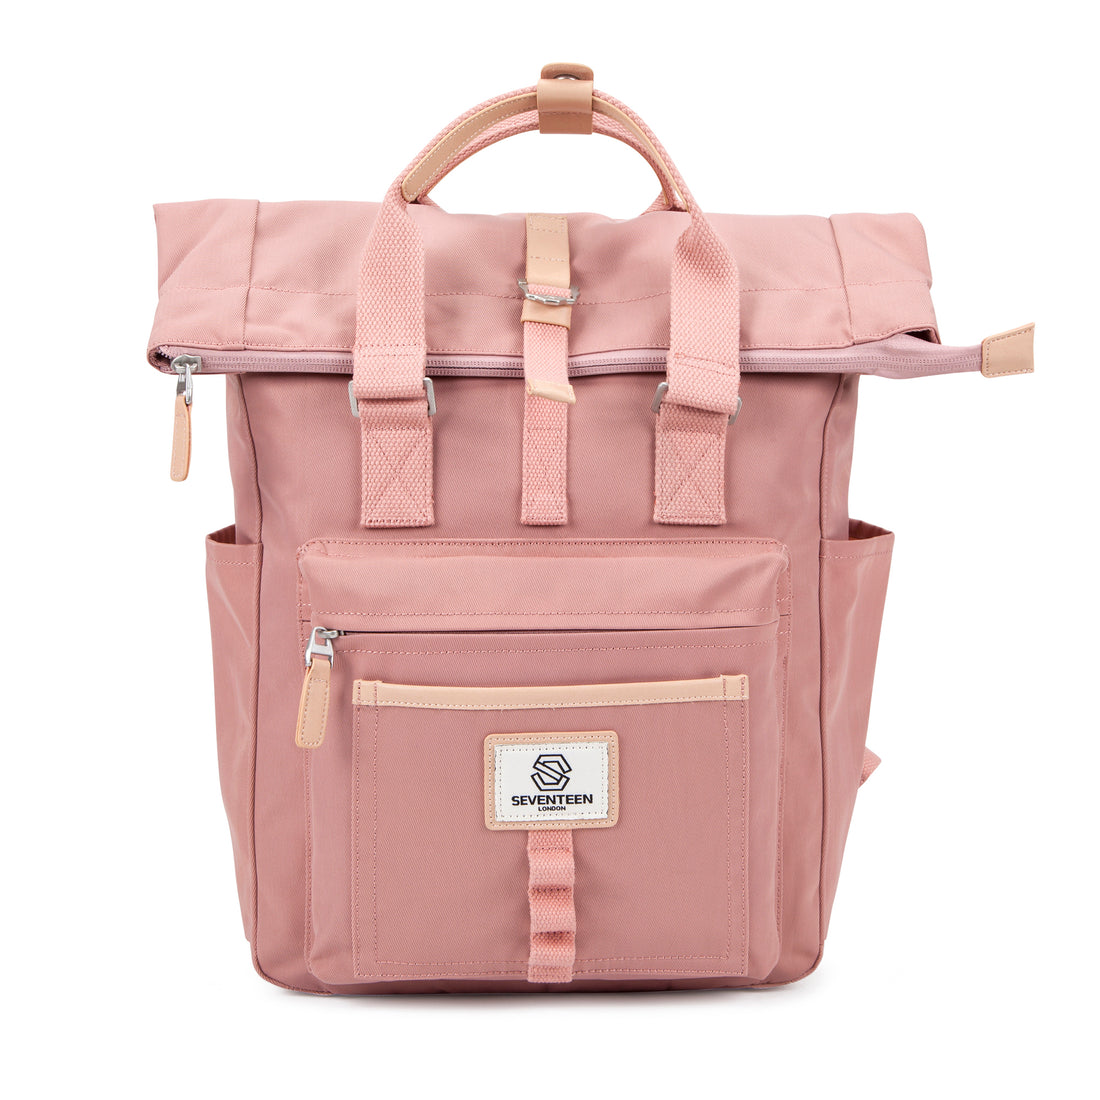 Canary Wharf Backpack-Backpack-17 London-Pink-SchoolBagsAndStuff